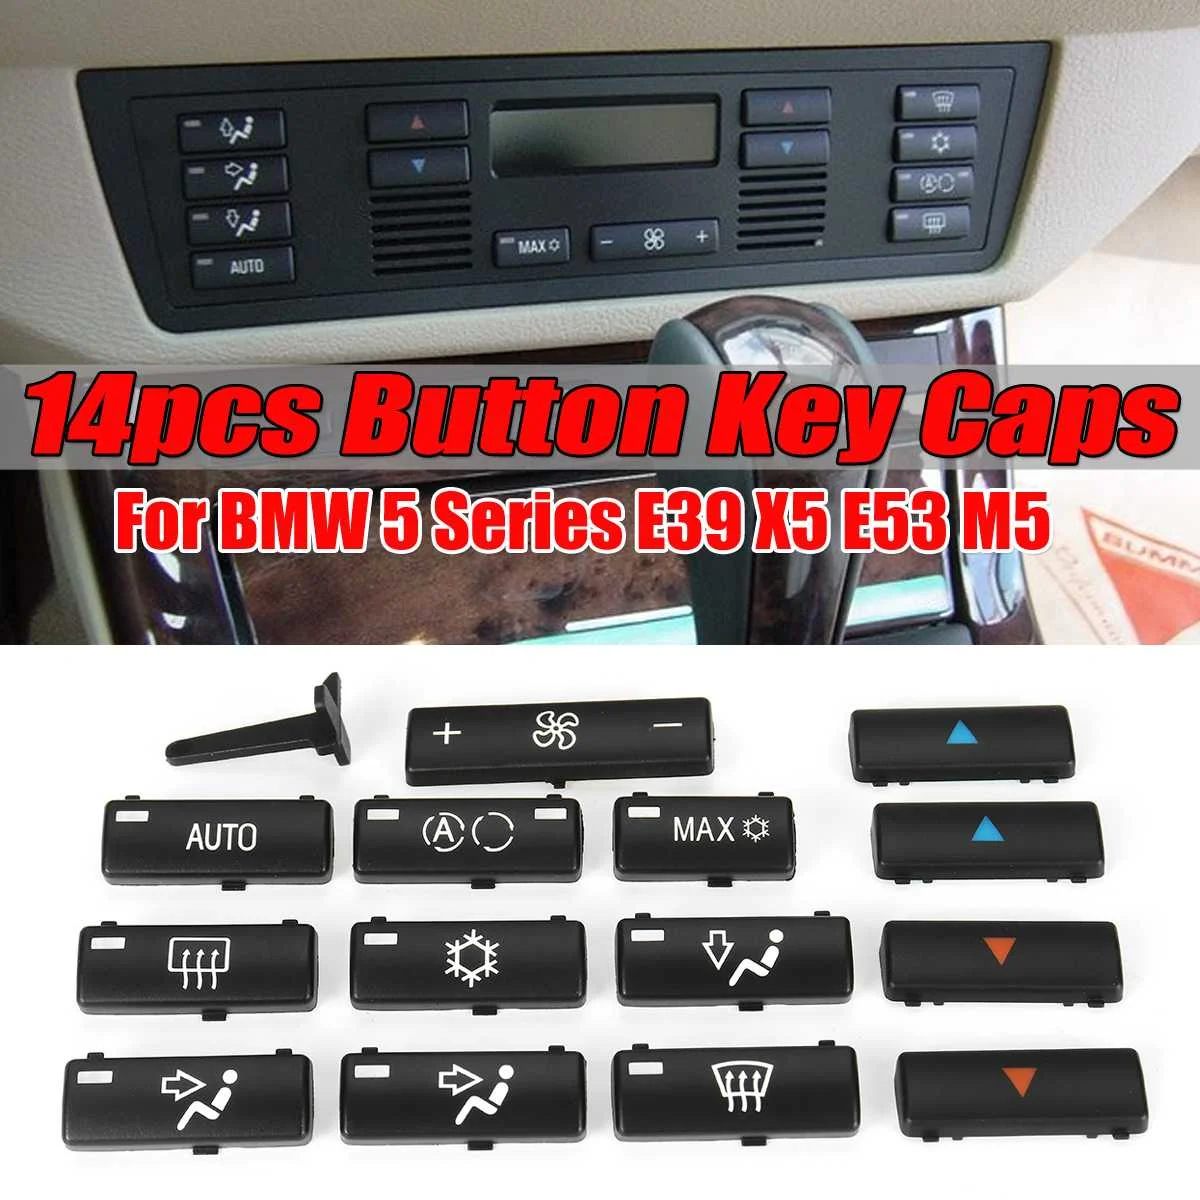 

14 Button Key Caps Replacement Climate A/C Control Control Panel Switch Buttons Cover Caps For BMW E39 E53 525i 530i 540i M5 X5